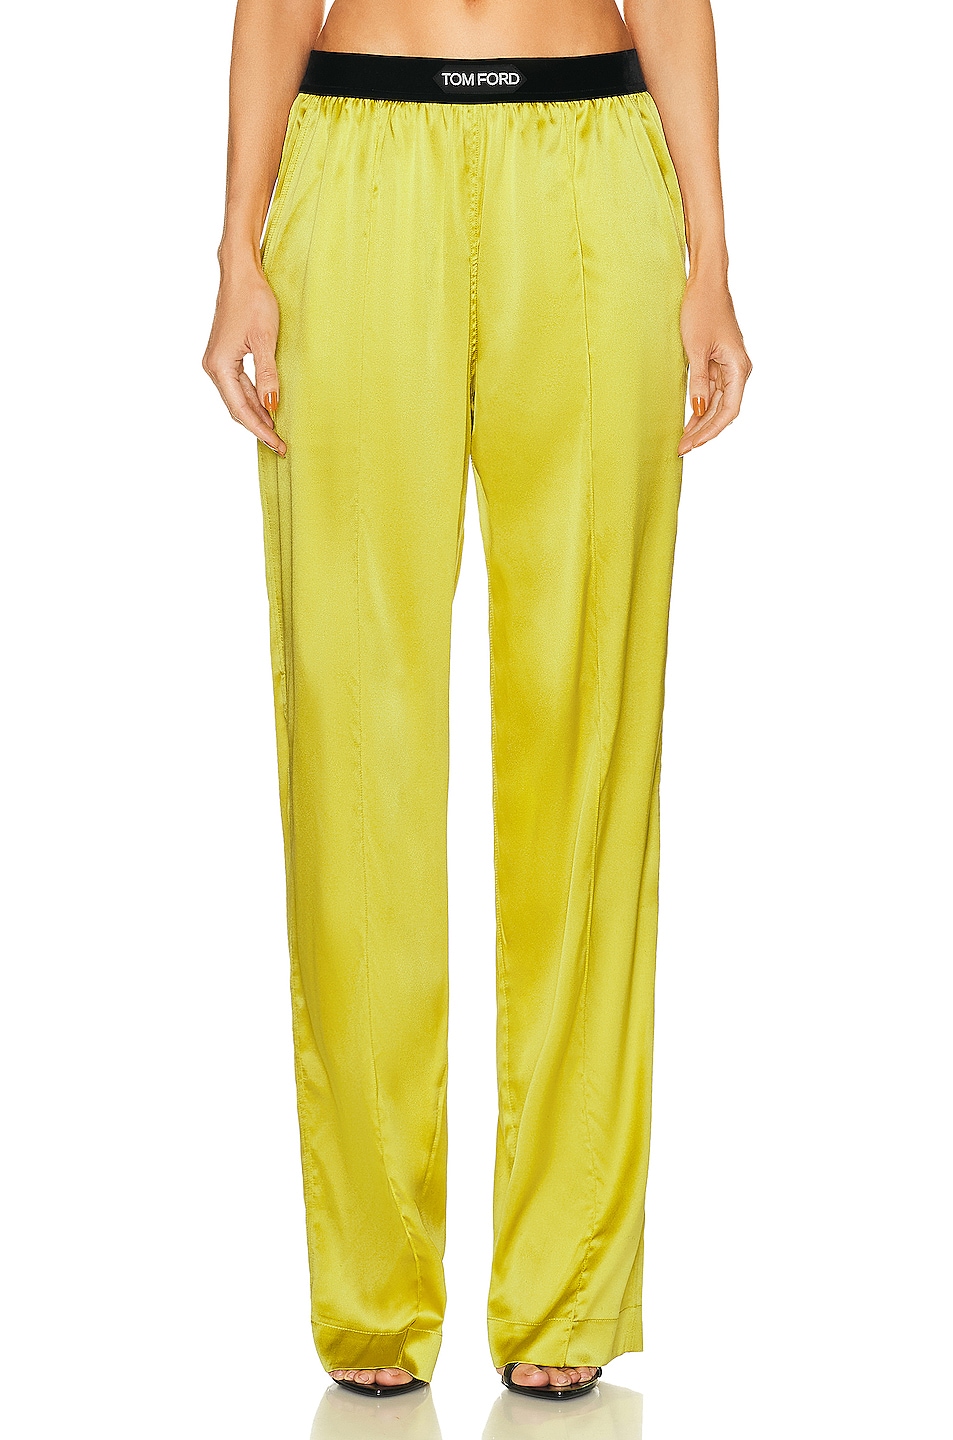 TOM FORD Satin Pant in Charteuse Citrine | FWRD